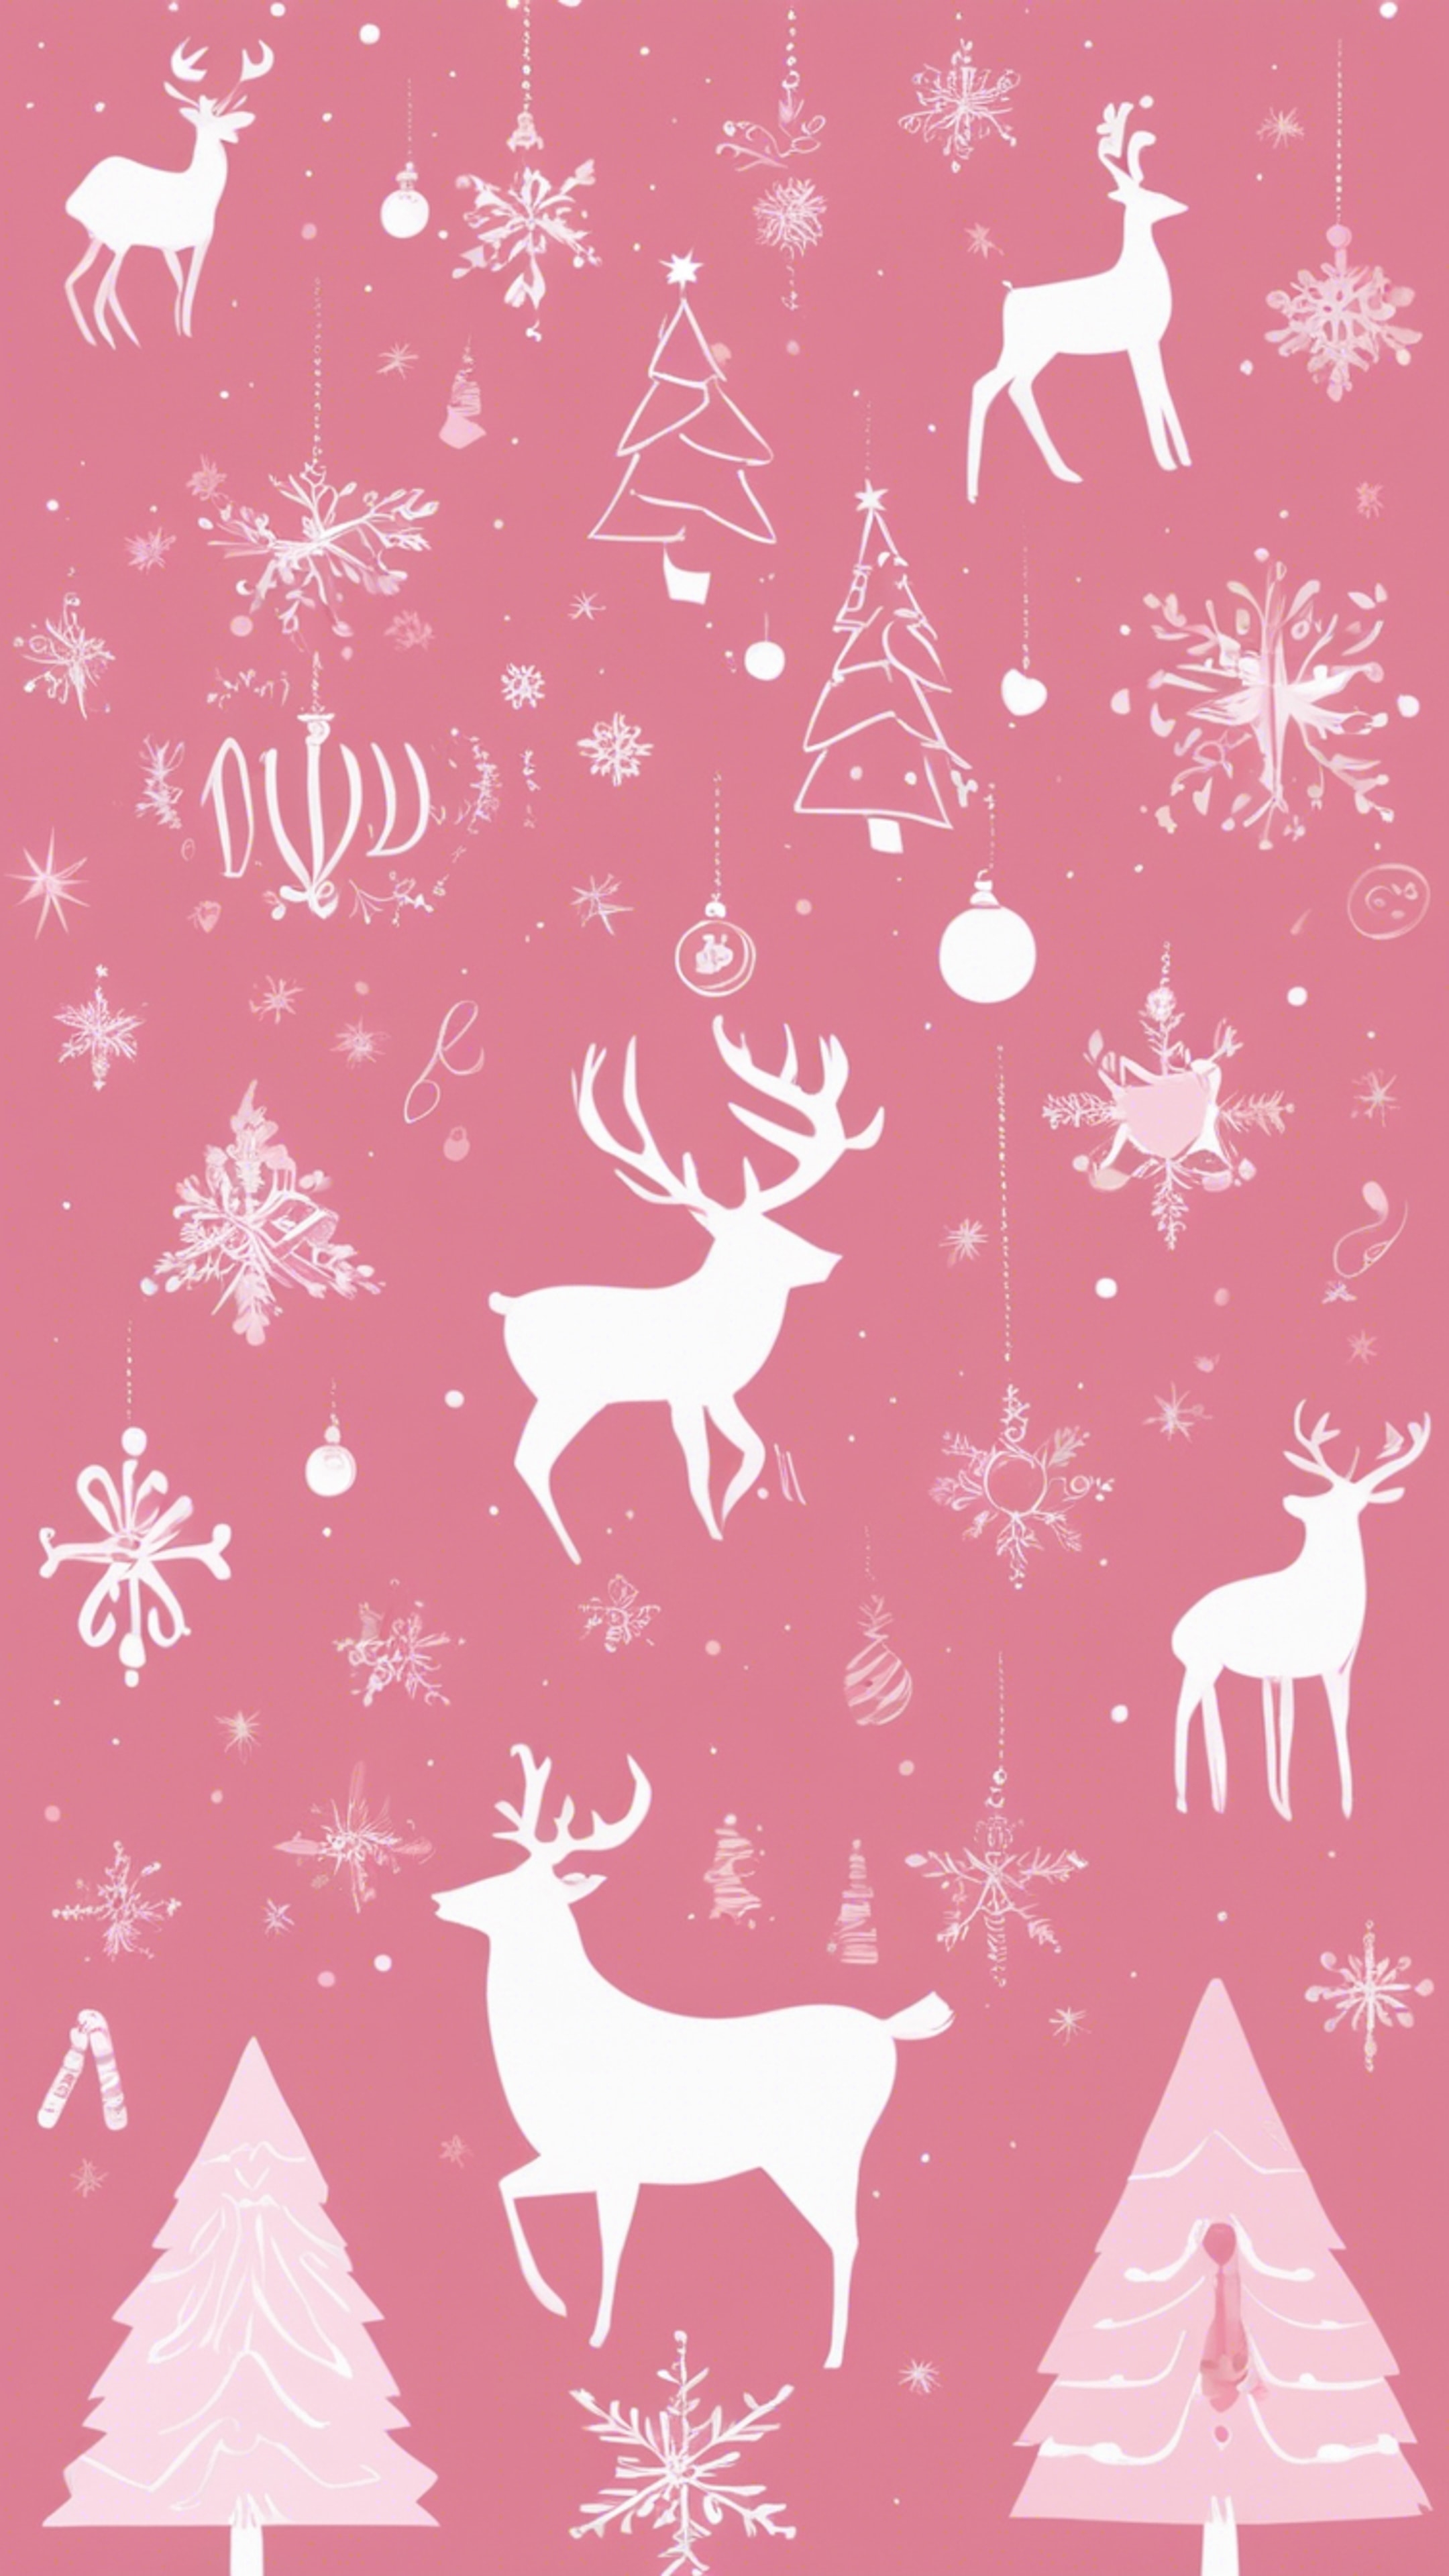 A minimally designed Christmas card with elegant pink illustrations of Christmas icons. วอลล์เปเปอร์[9459a801713f4624aabe]